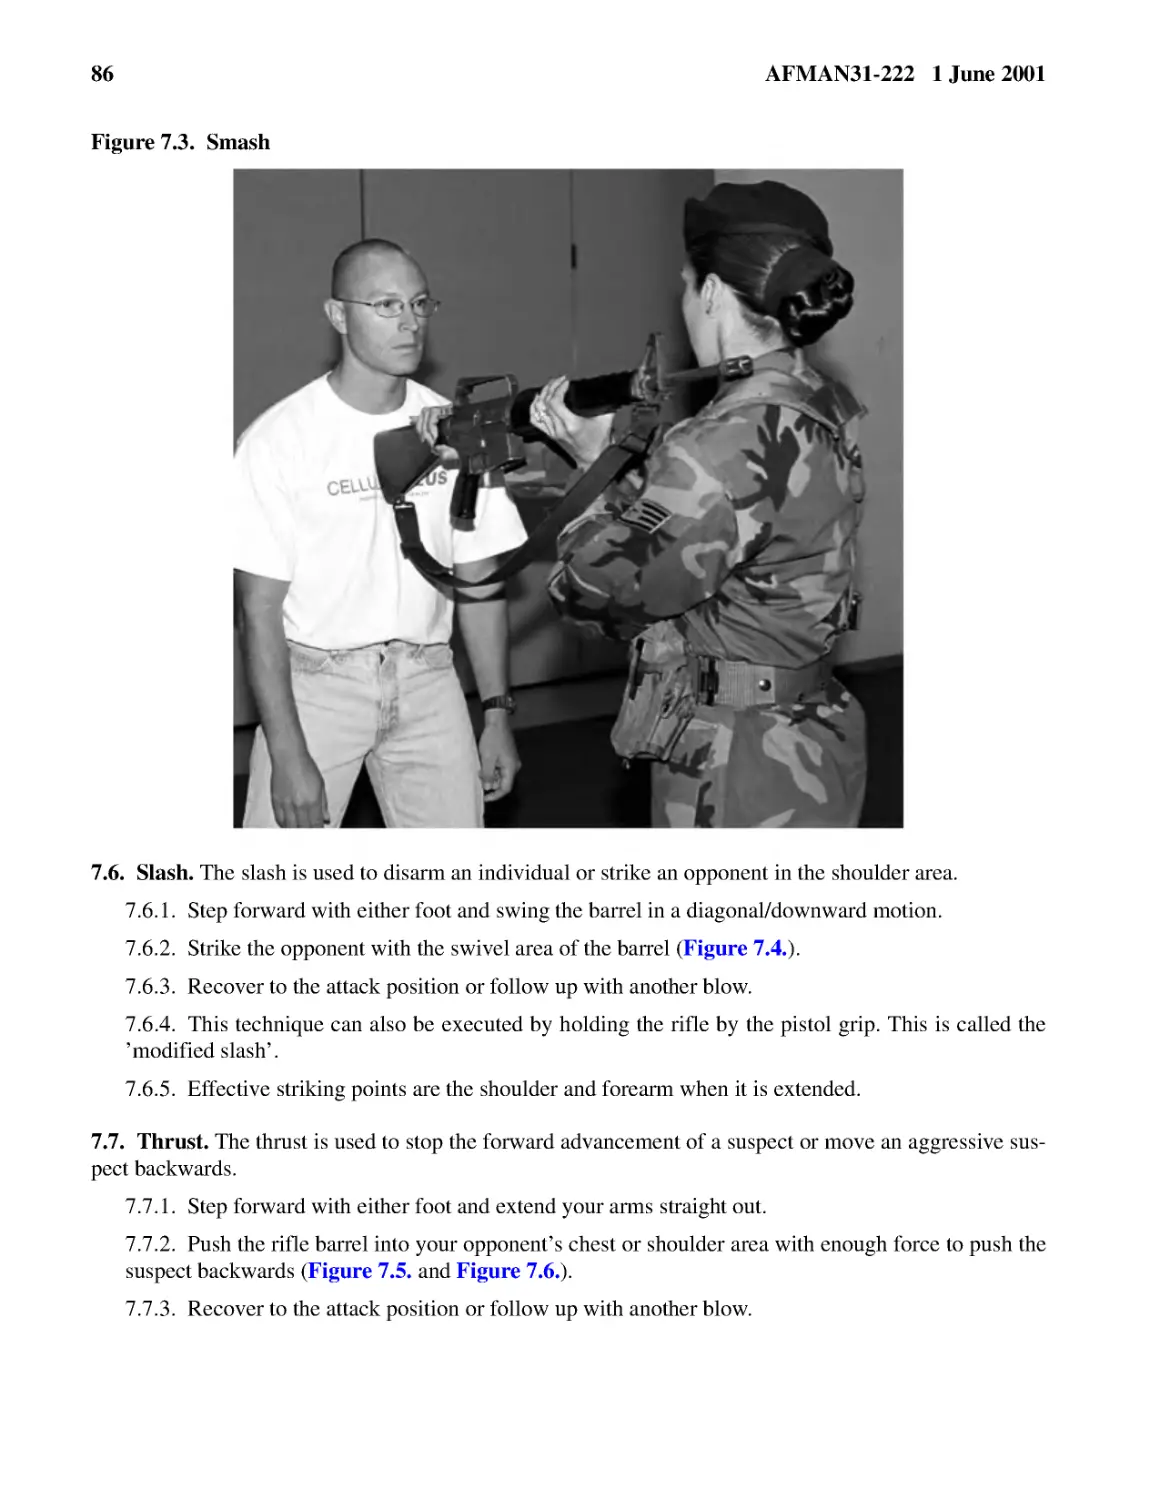 Figure 7.3.� Smash
7.6.� Slash.
7.6.2.� Strike the opponent with the swivel area of the barrel (
7.6.3.� Recover to the attack position or follow up with another blow.
7.6.4.� This technique can also be executed by holding the rifle by the pistol grip. This is call...
7.6.5.� Effective striking points are the shoulder and forearm when it is extended.
7.7.� Thrust.
7.7.2.� Push the rifle barrel into your opponent’s chest or shoulder area with enough force to pu...
7.7.3.� Recover to the attack position or follow up with another blow.